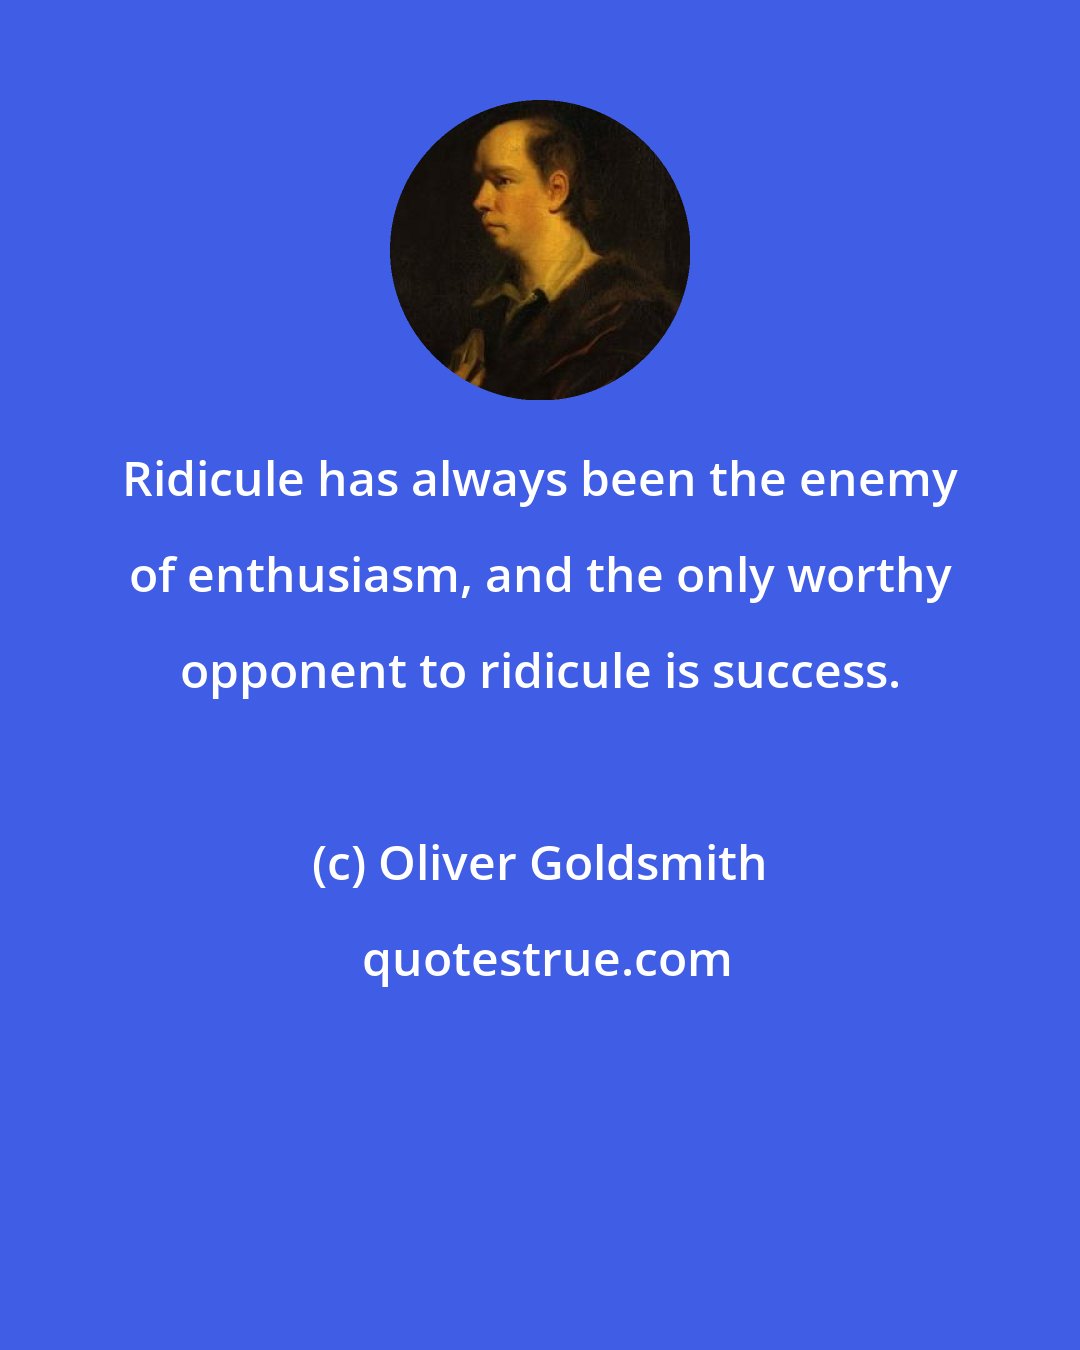 Oliver Goldsmith: Ridicule has always been the enemy of enthusiasm, and the only worthy opponent to ridicule is success.